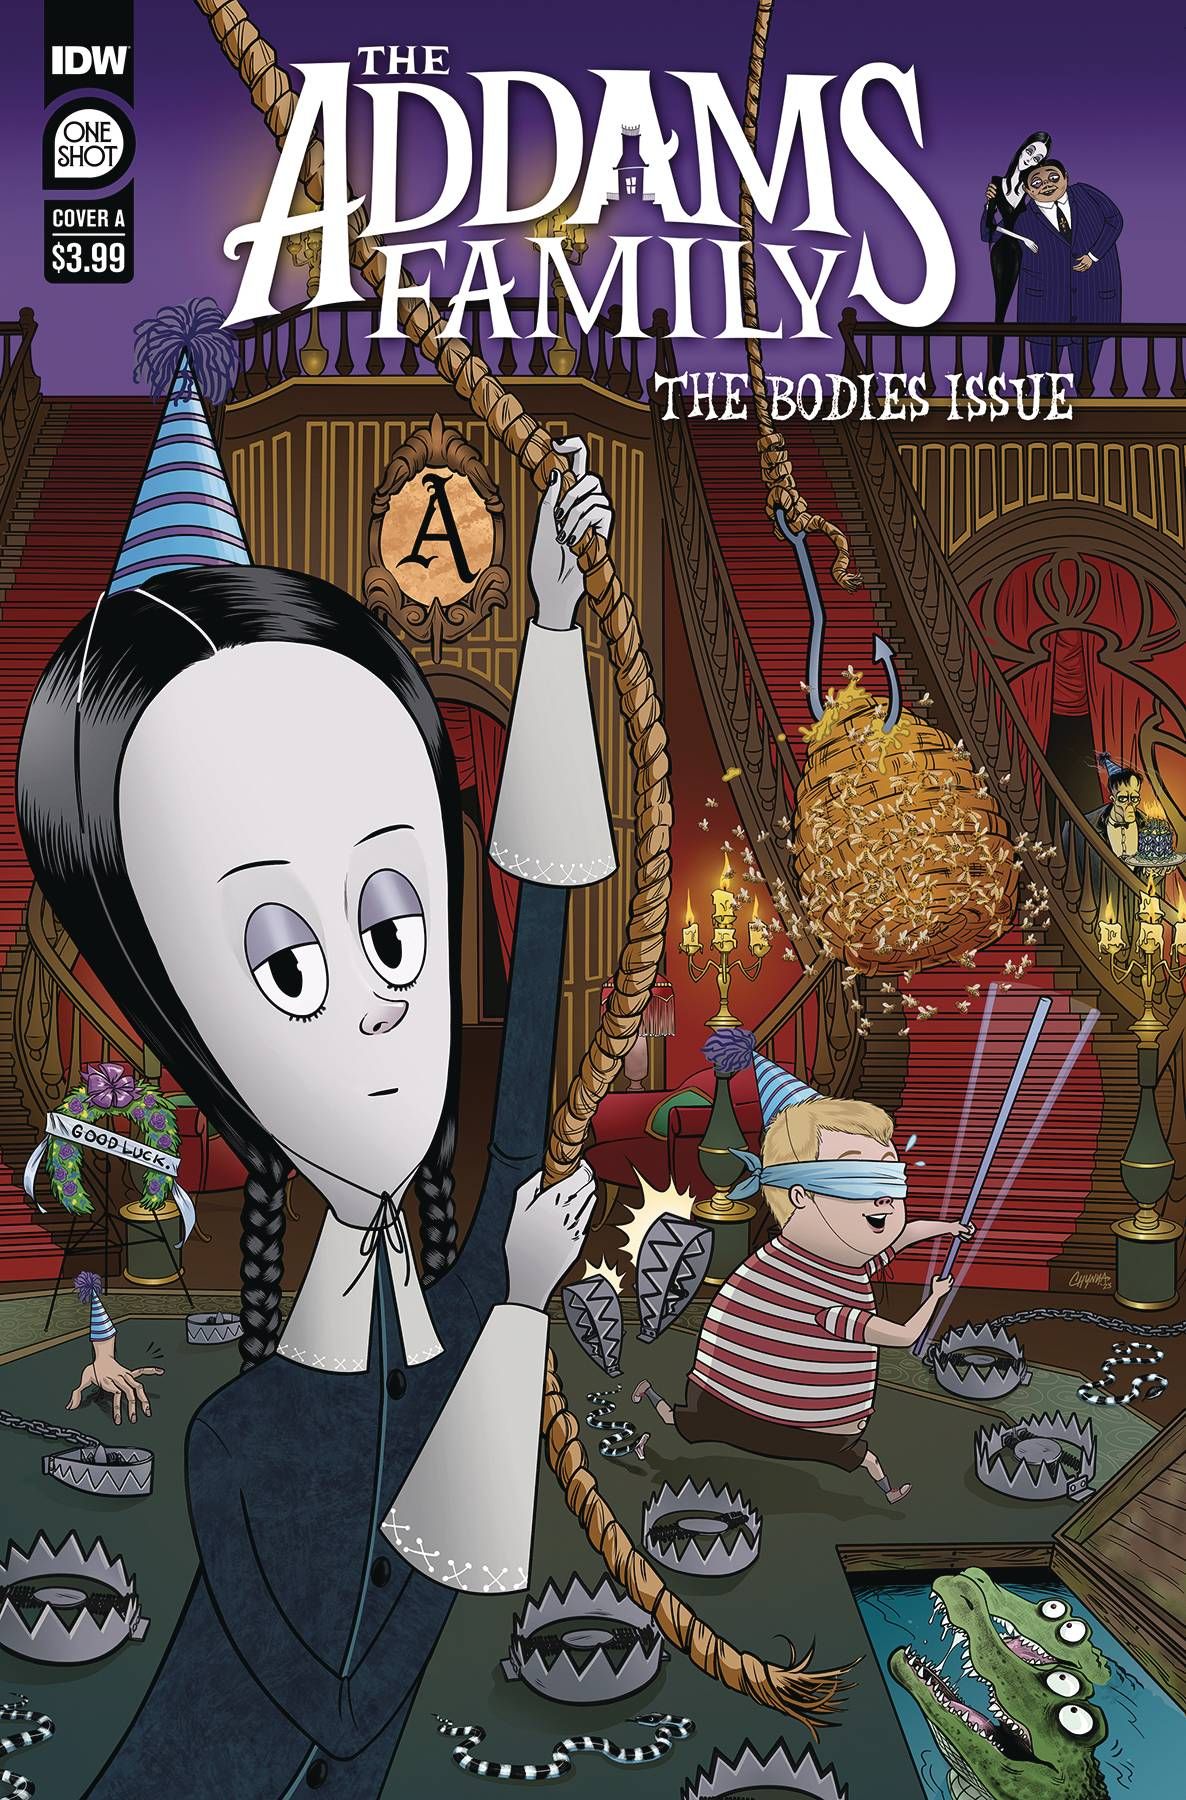 Addams Family: The Bodies Issue #1 Comic